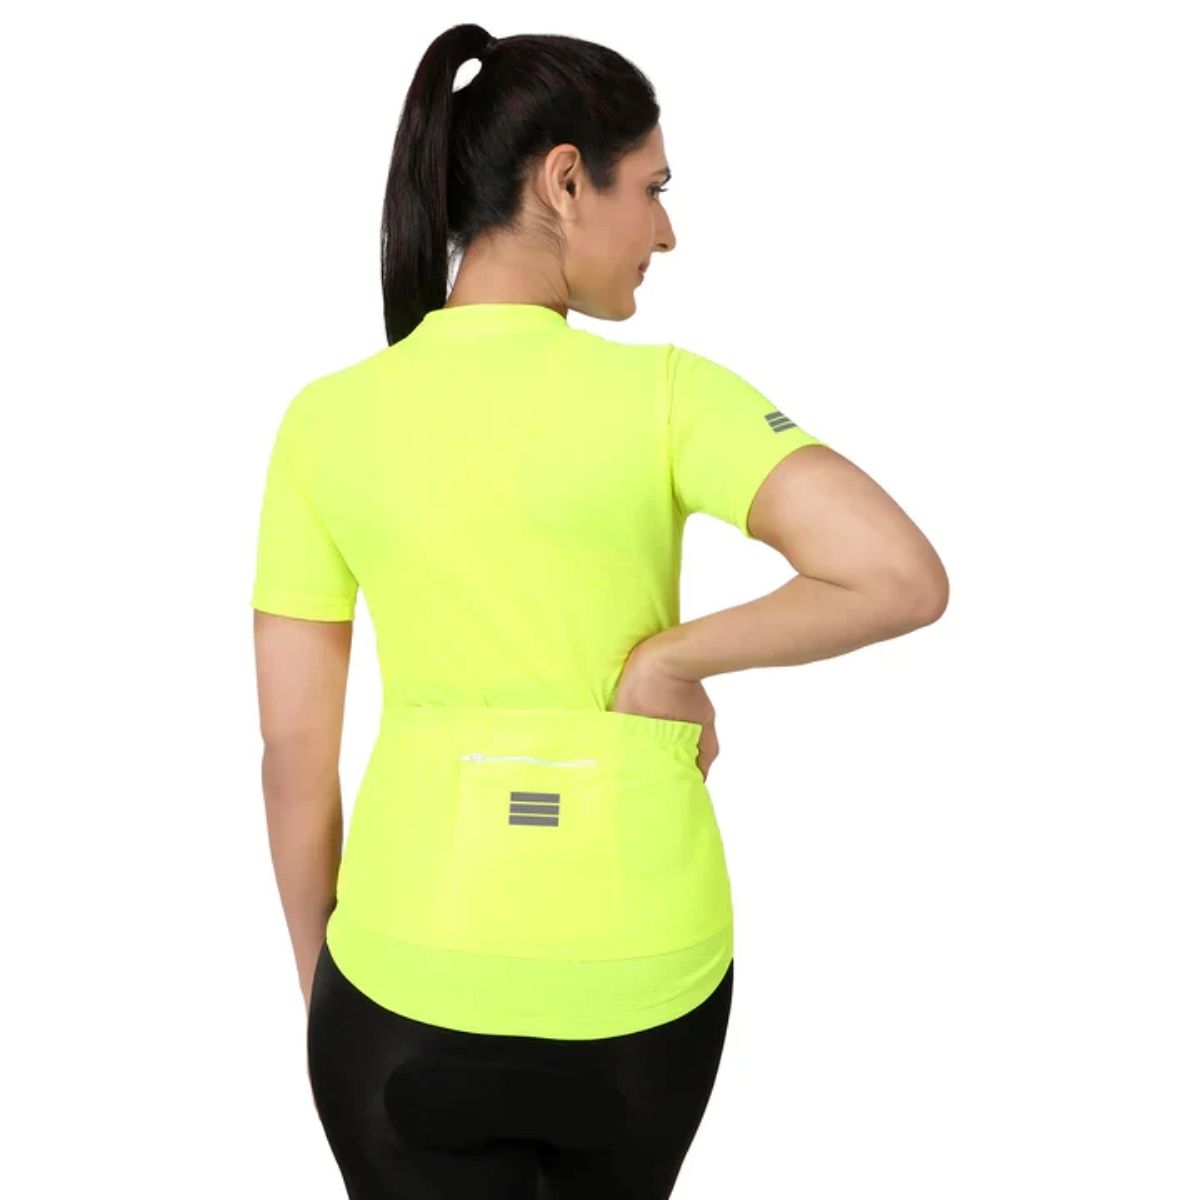 Womens BeVisible Cycling Jersey - Half Sleeves - Neon Green 3